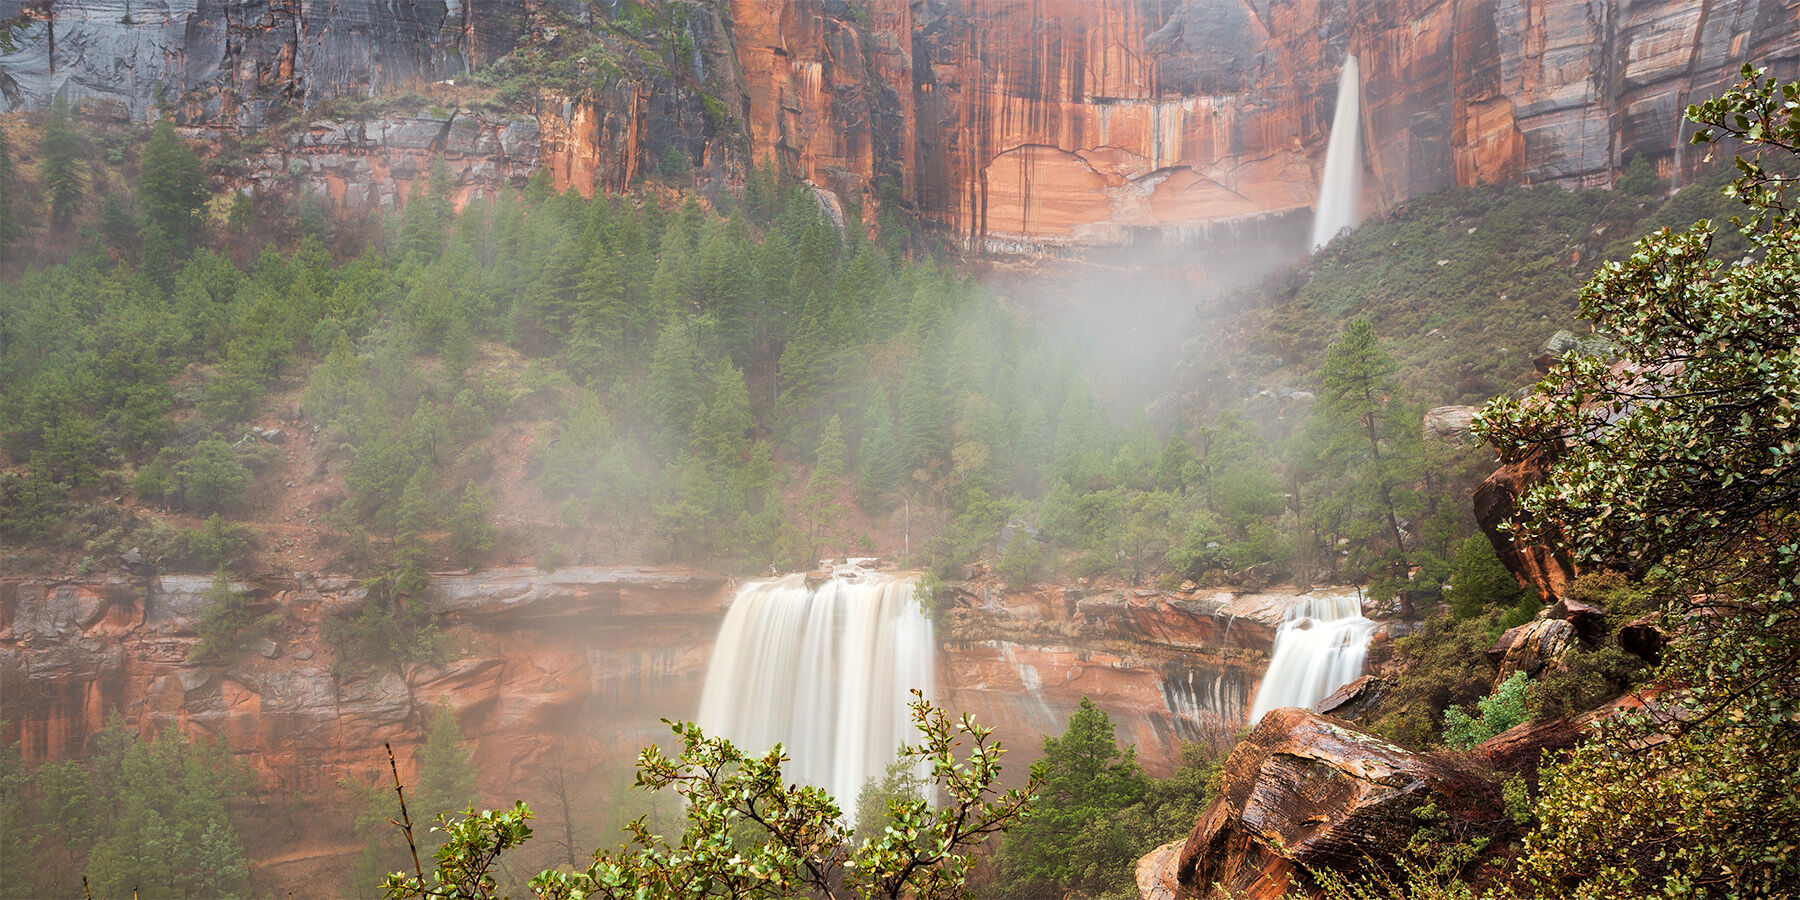 Emerald Pools in Zion National Park flooding at full capacity with three waterfalls in view. 